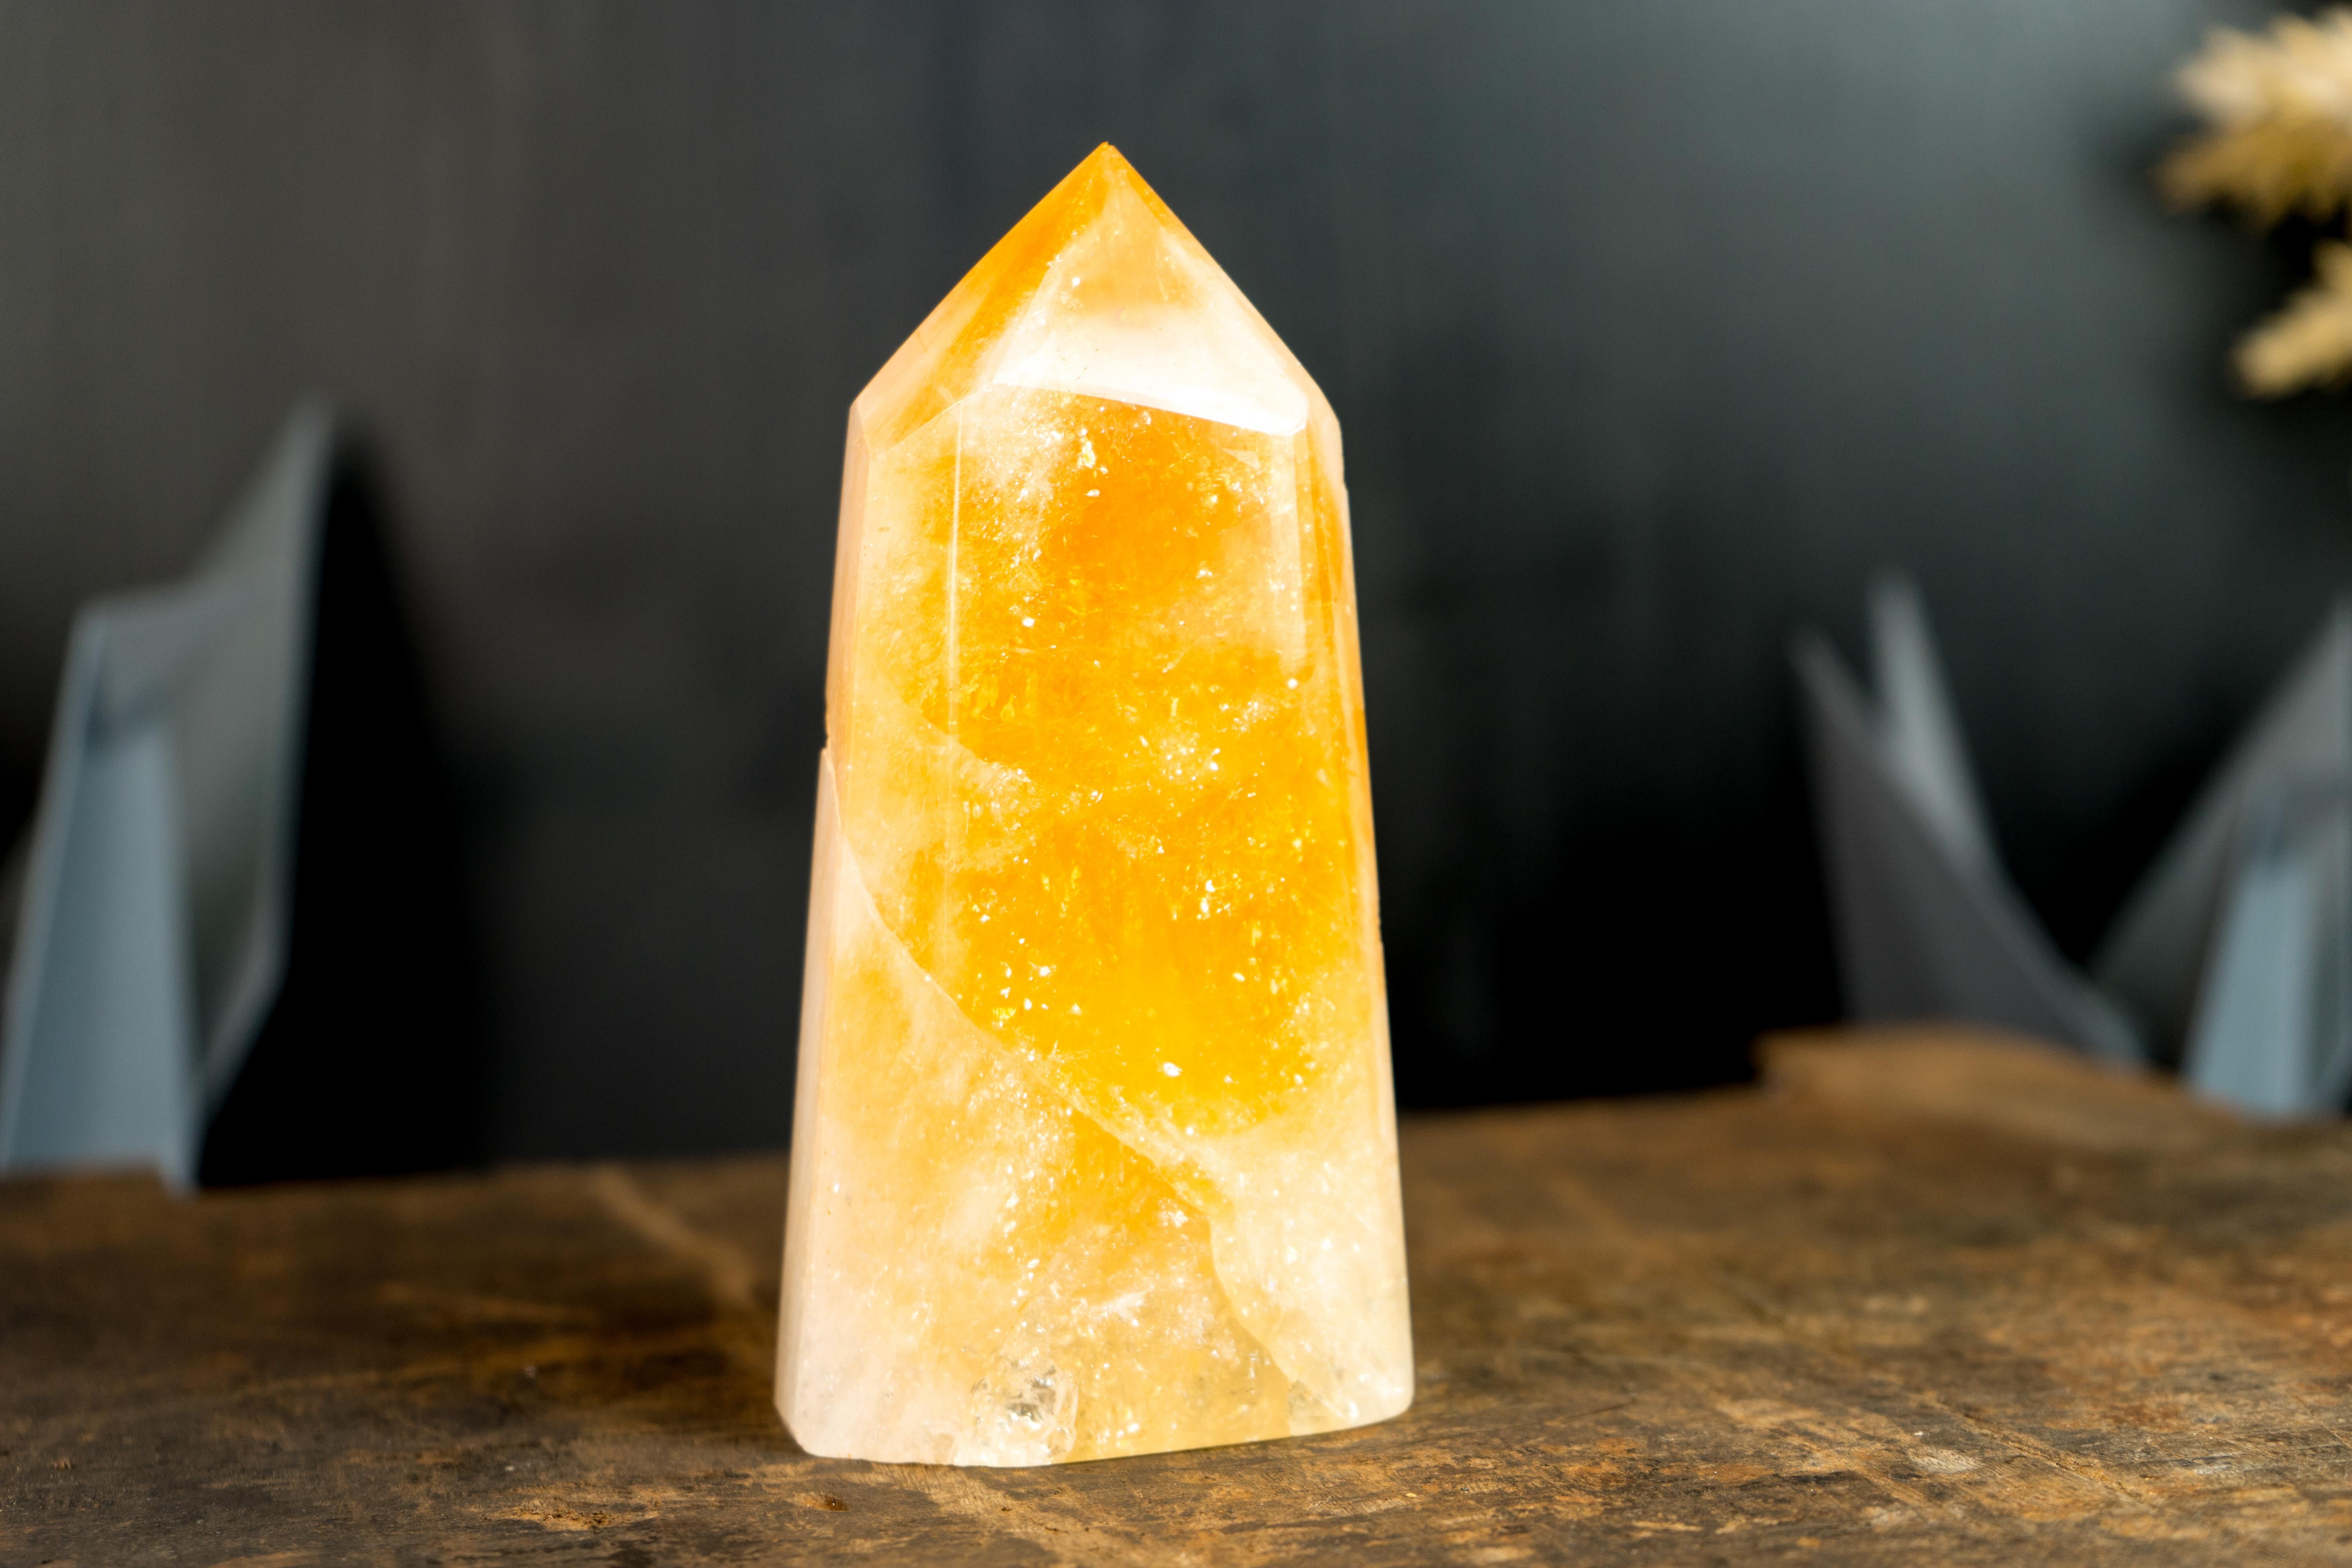 With remarkable beauty, hand-made work and aesthetics, this Citrine Point Generator was meticulously cut and polished to showcase a perfect blend of natural beauty and responsible mining. A Citrine Obelisk that makes a valuable addition to your